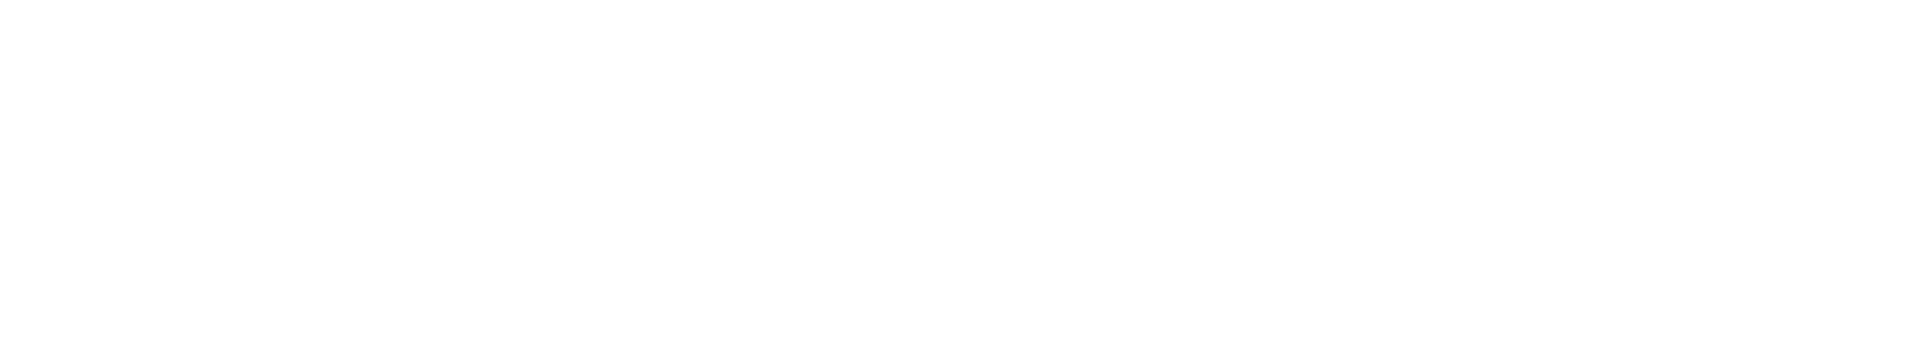 Advanced Metal Recyclers logo